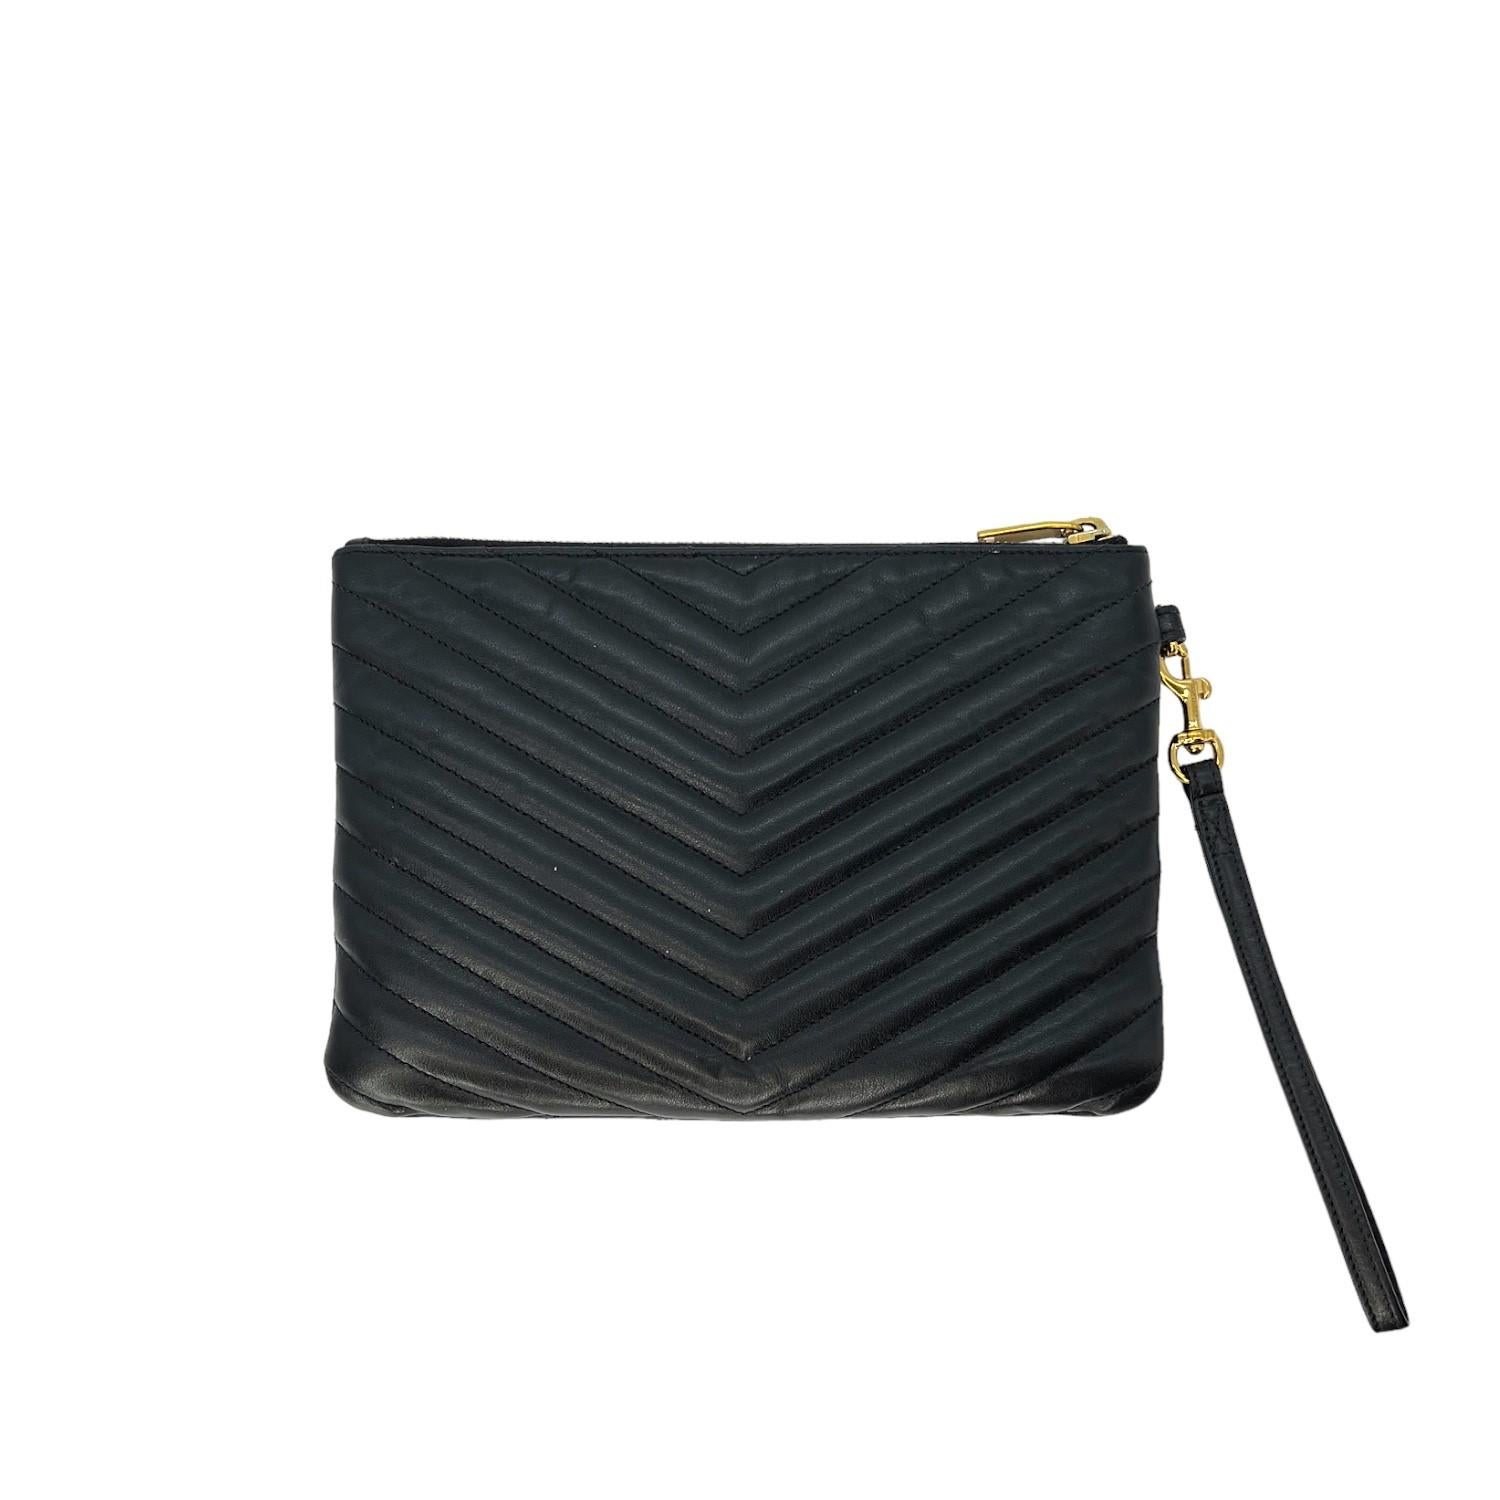 This Saint Laurent Monogram Matelassé Cassandre A5 Pouch was made in Italy and it is finely crafted of a quilted calfskin leather exterior with gold-tone hardware features. It has a removeable flat leather handle. It has a zipper closure that opens